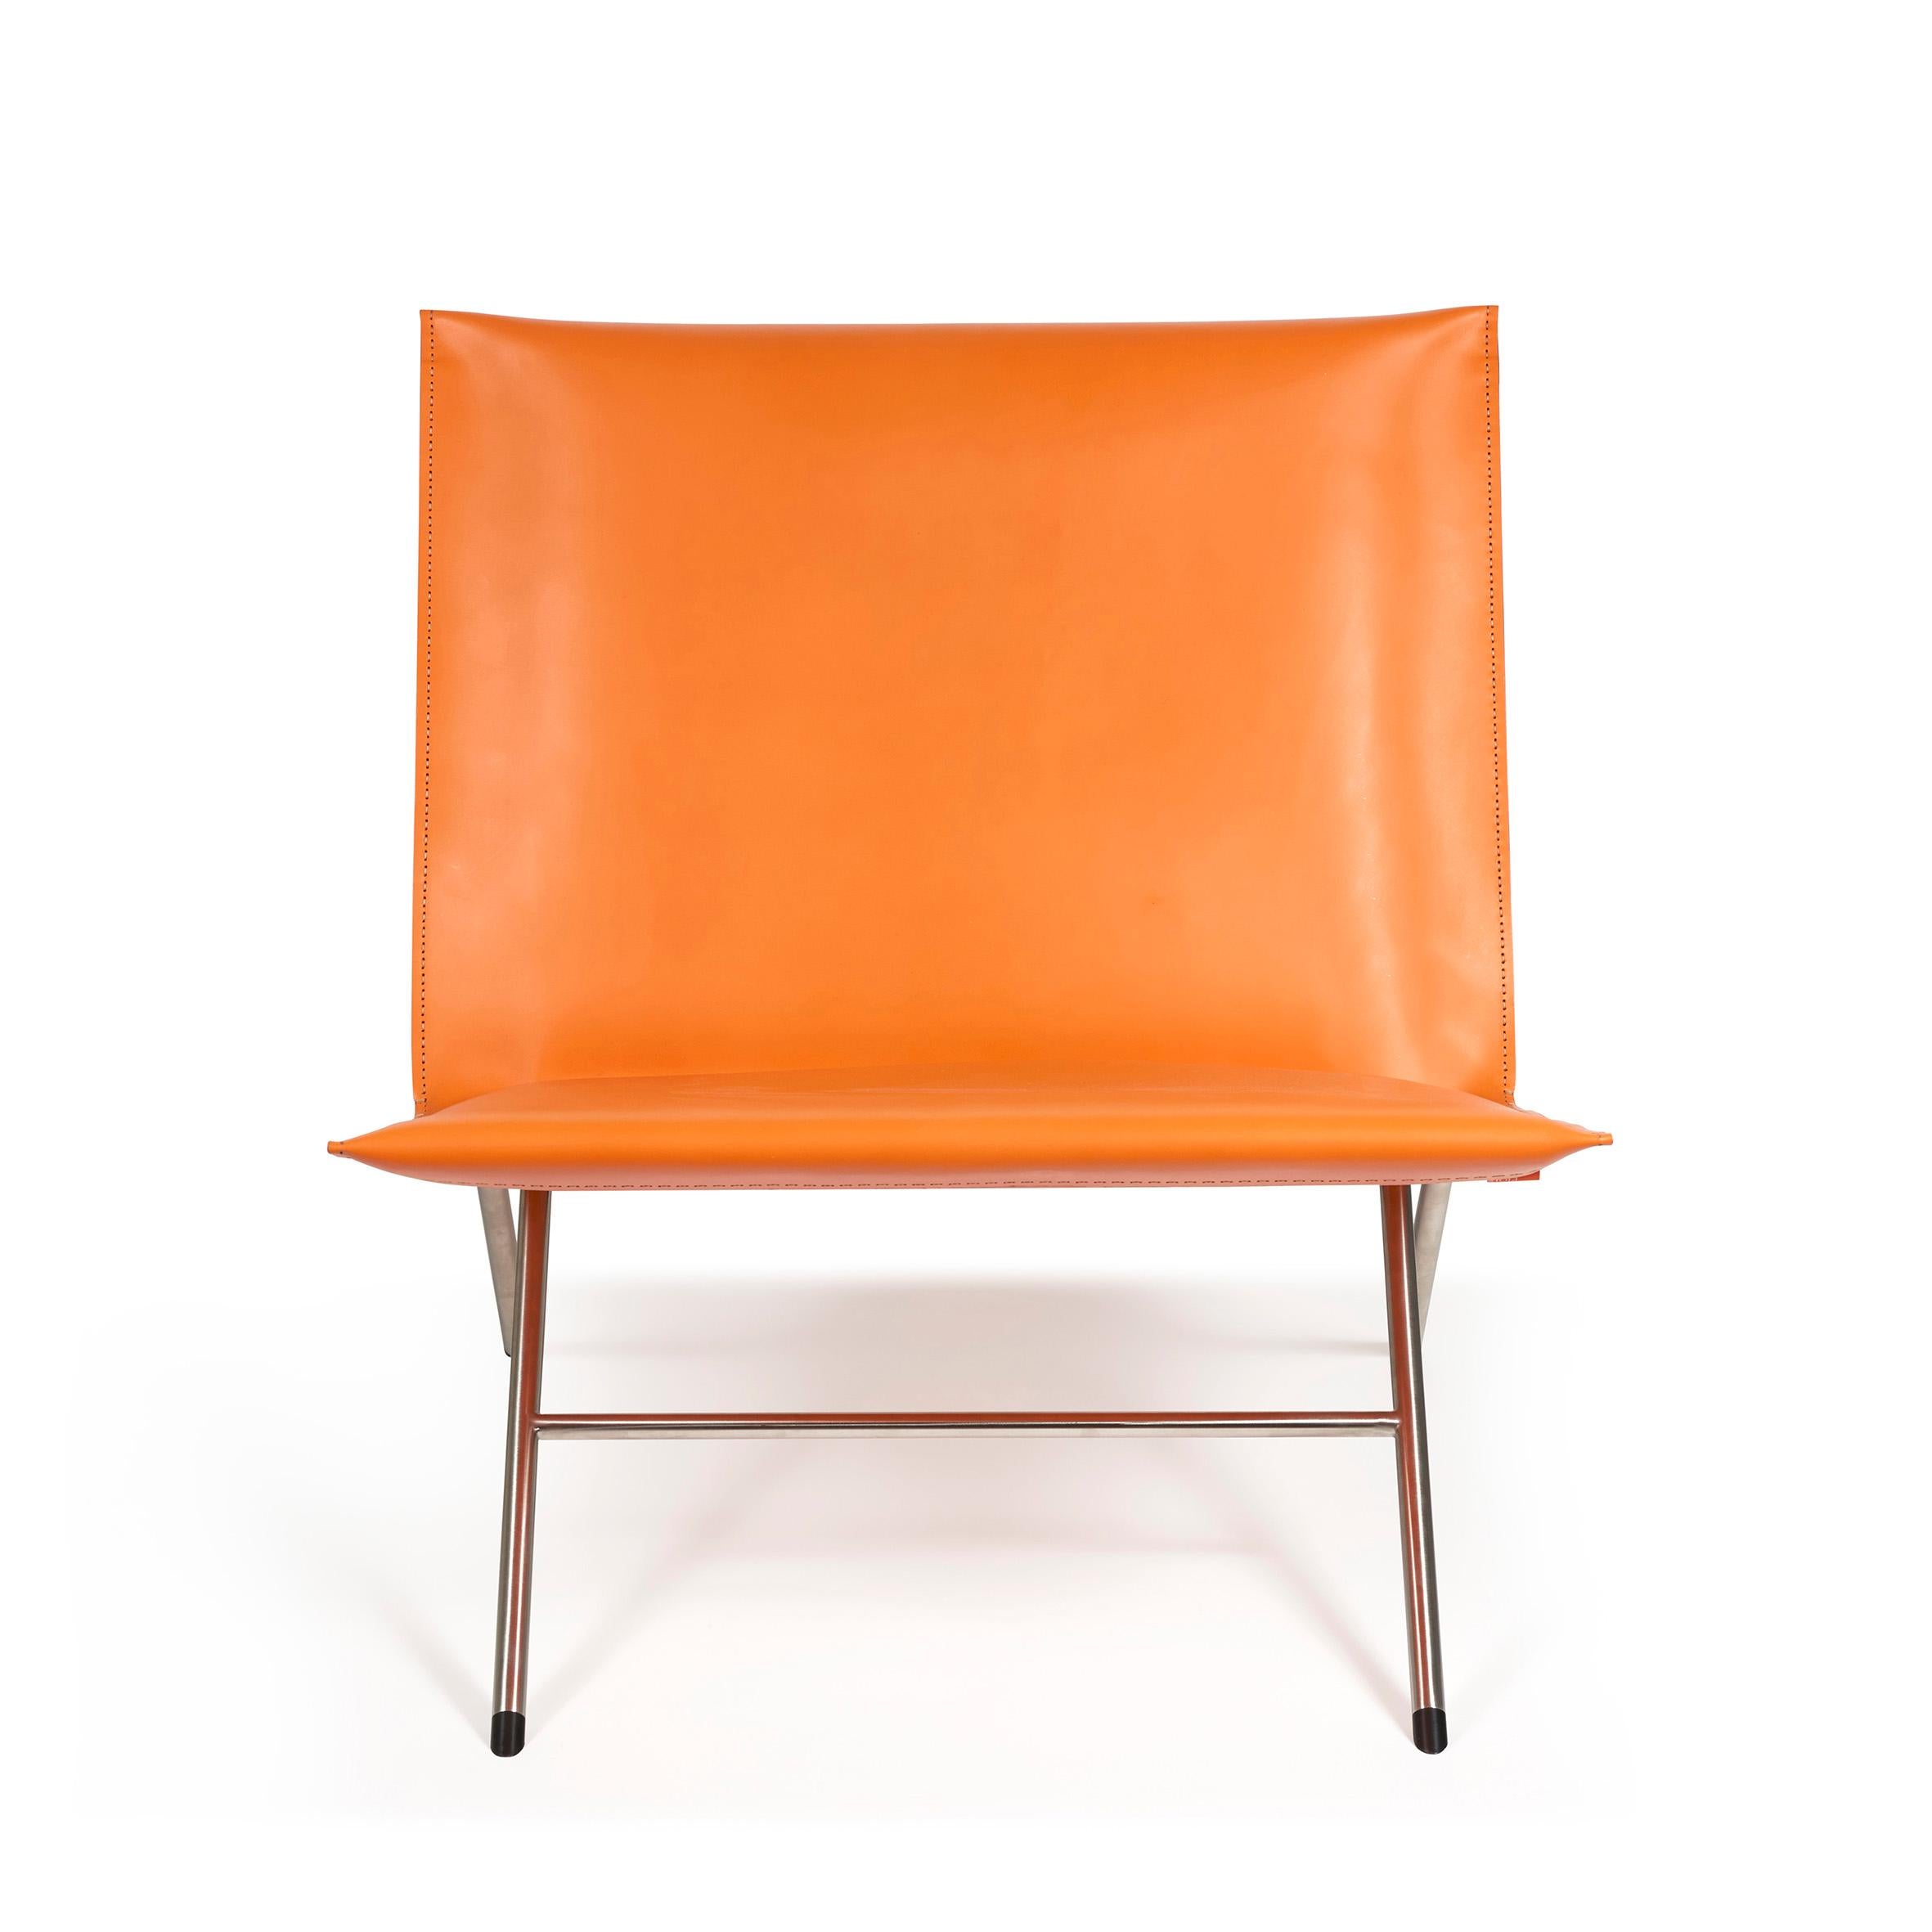 Gioia Meller-Marcovicz.

Recline

A stainless steel and Arancio leather foldable lounge chair.
The rectangular back and seat covered with dyed leather on a stainless folding structure issuing four cylindrical feet.
Made in Italy.

A new